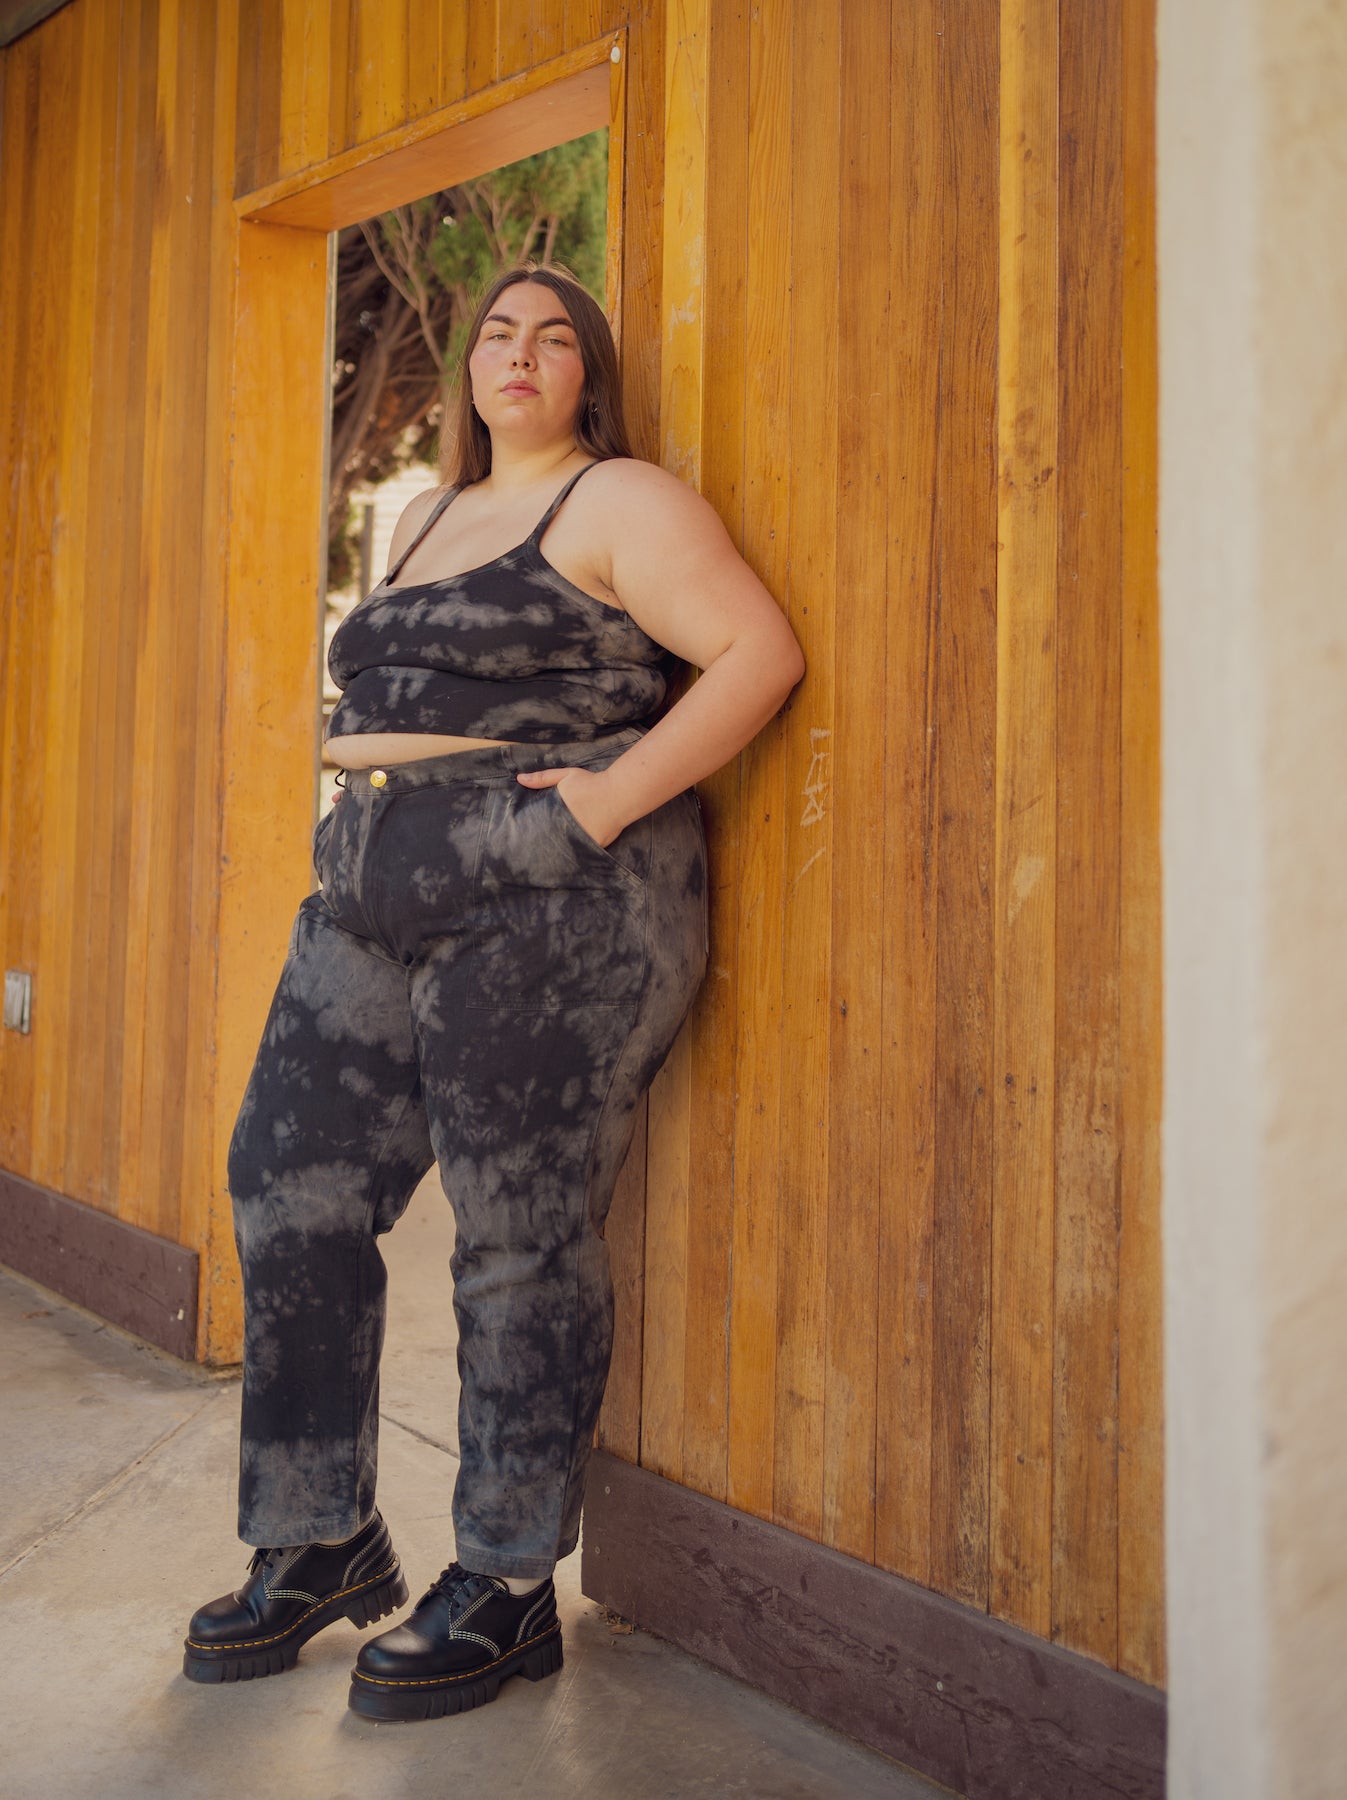 Marielena is wearing Cropped Cami in Black Magic Waters and Black Magic Waters Work Pants